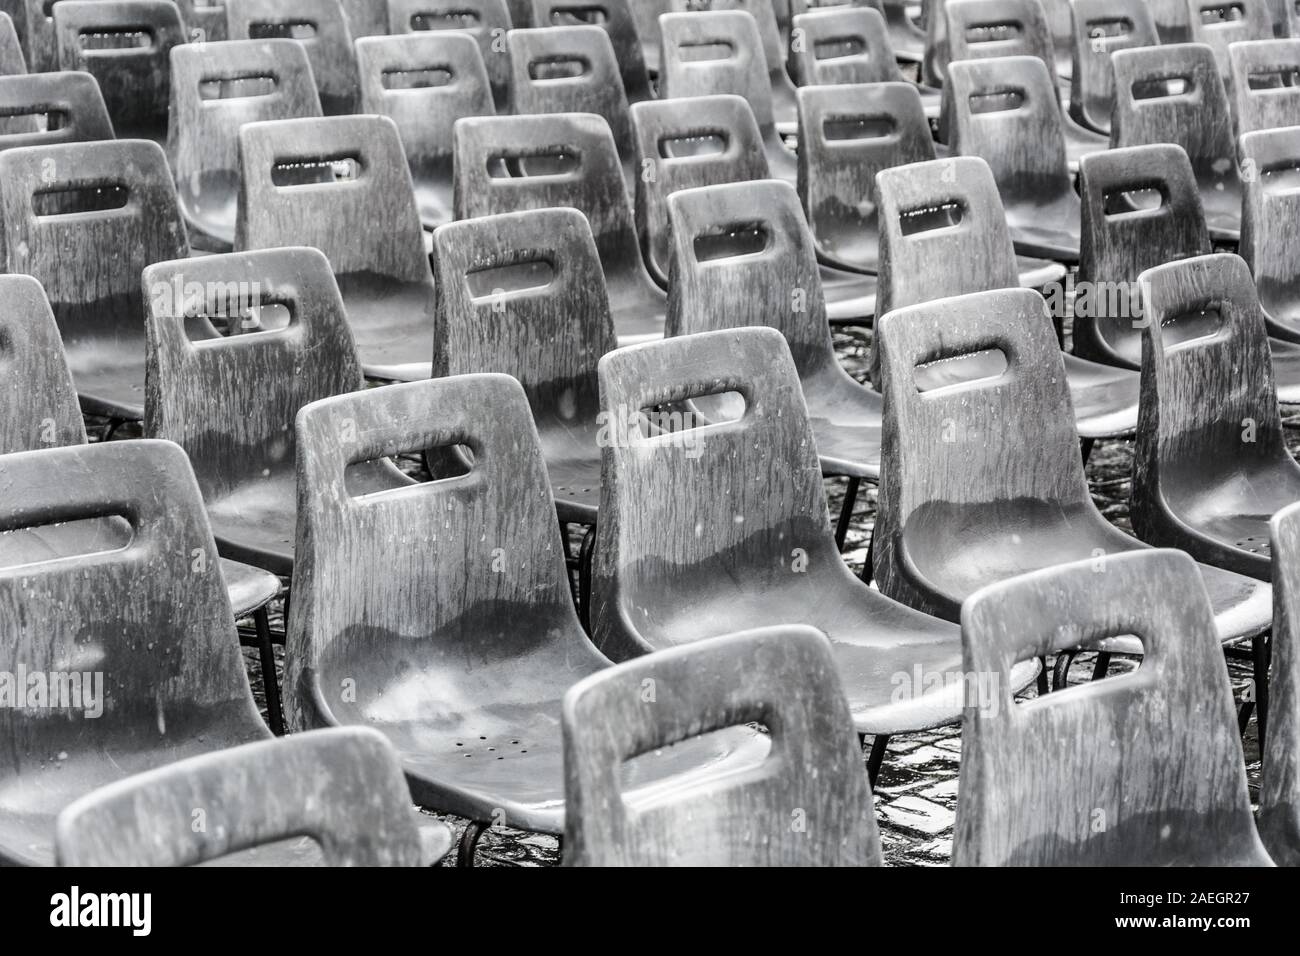 Rows of empty gray chairs in the rain, background. Stock Photo